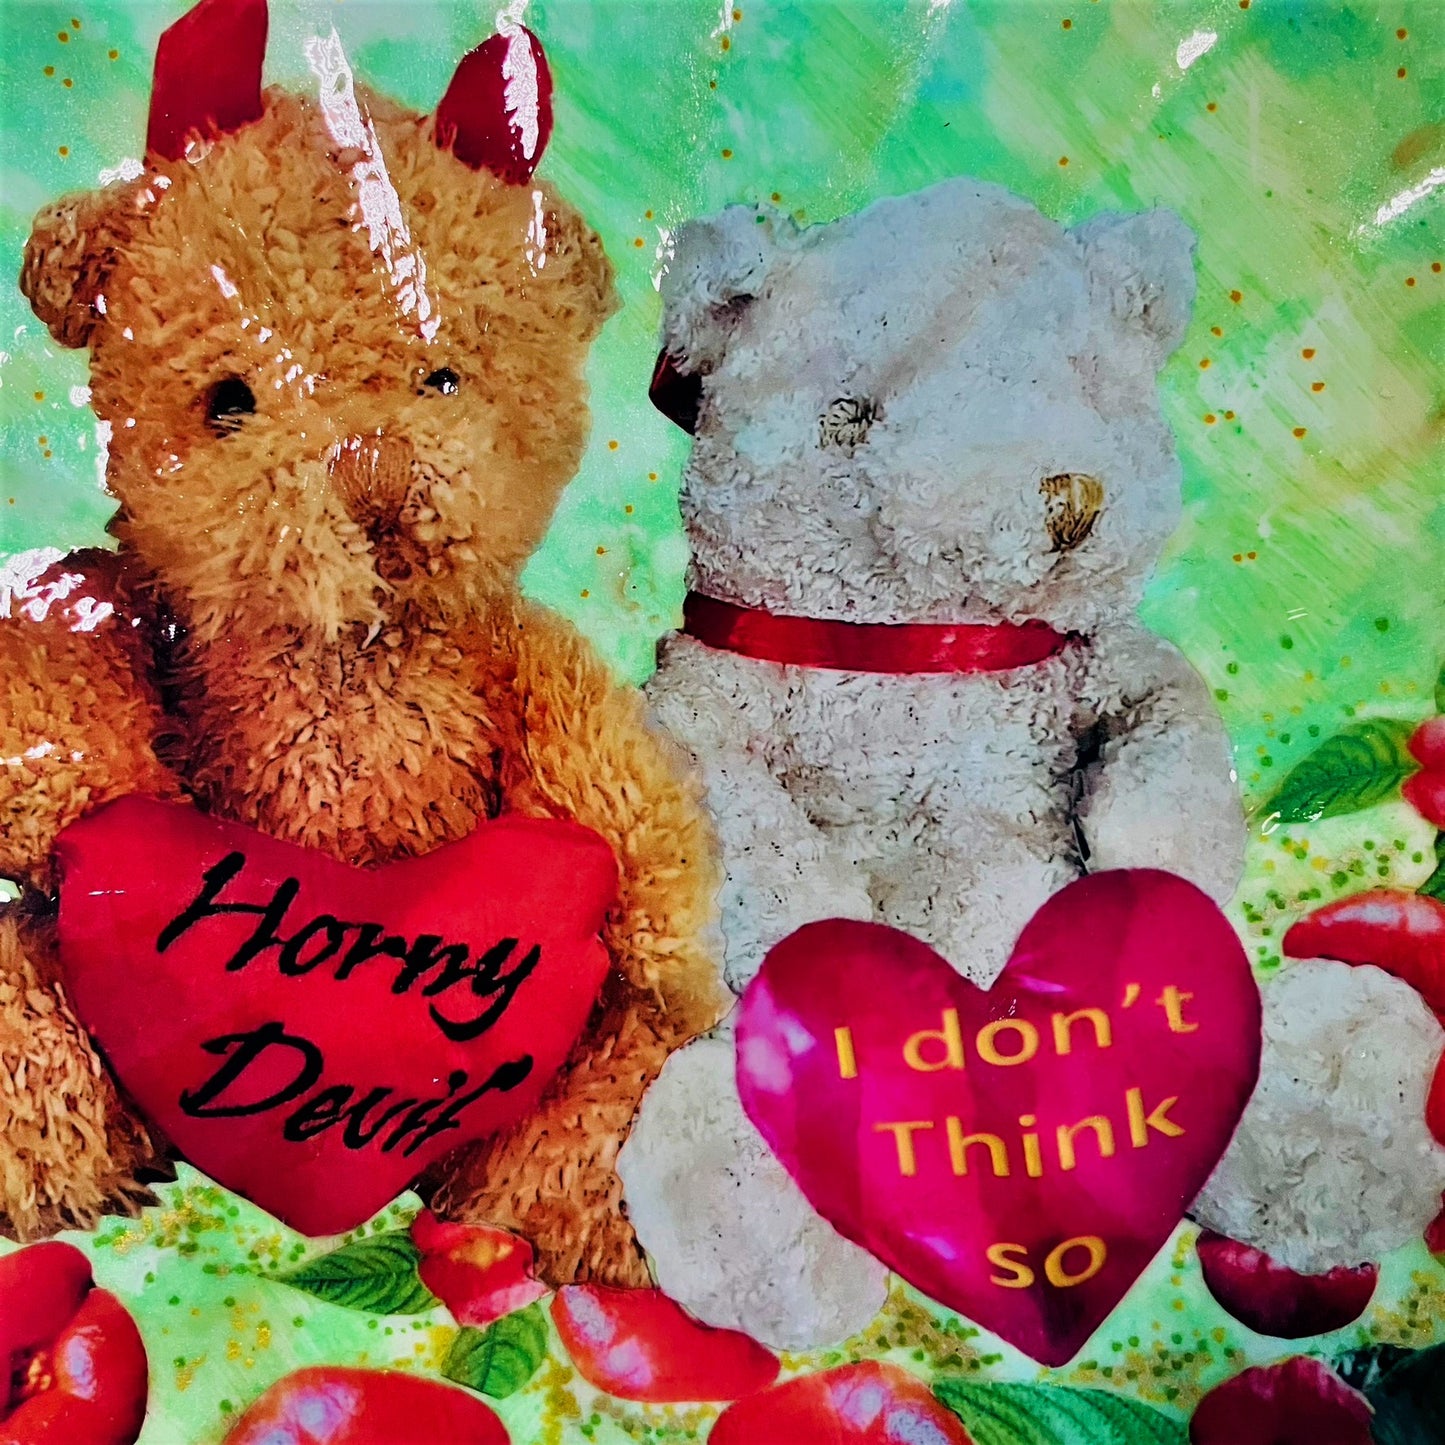 "Horny Devil. I Don't Think So" Wall Plate by House of Frisson, featuring a collage of two teddy bears holding hearts with messages, among lip-shaped flowers, on a green background. Closeup detail of the teddy bears holding hearts.